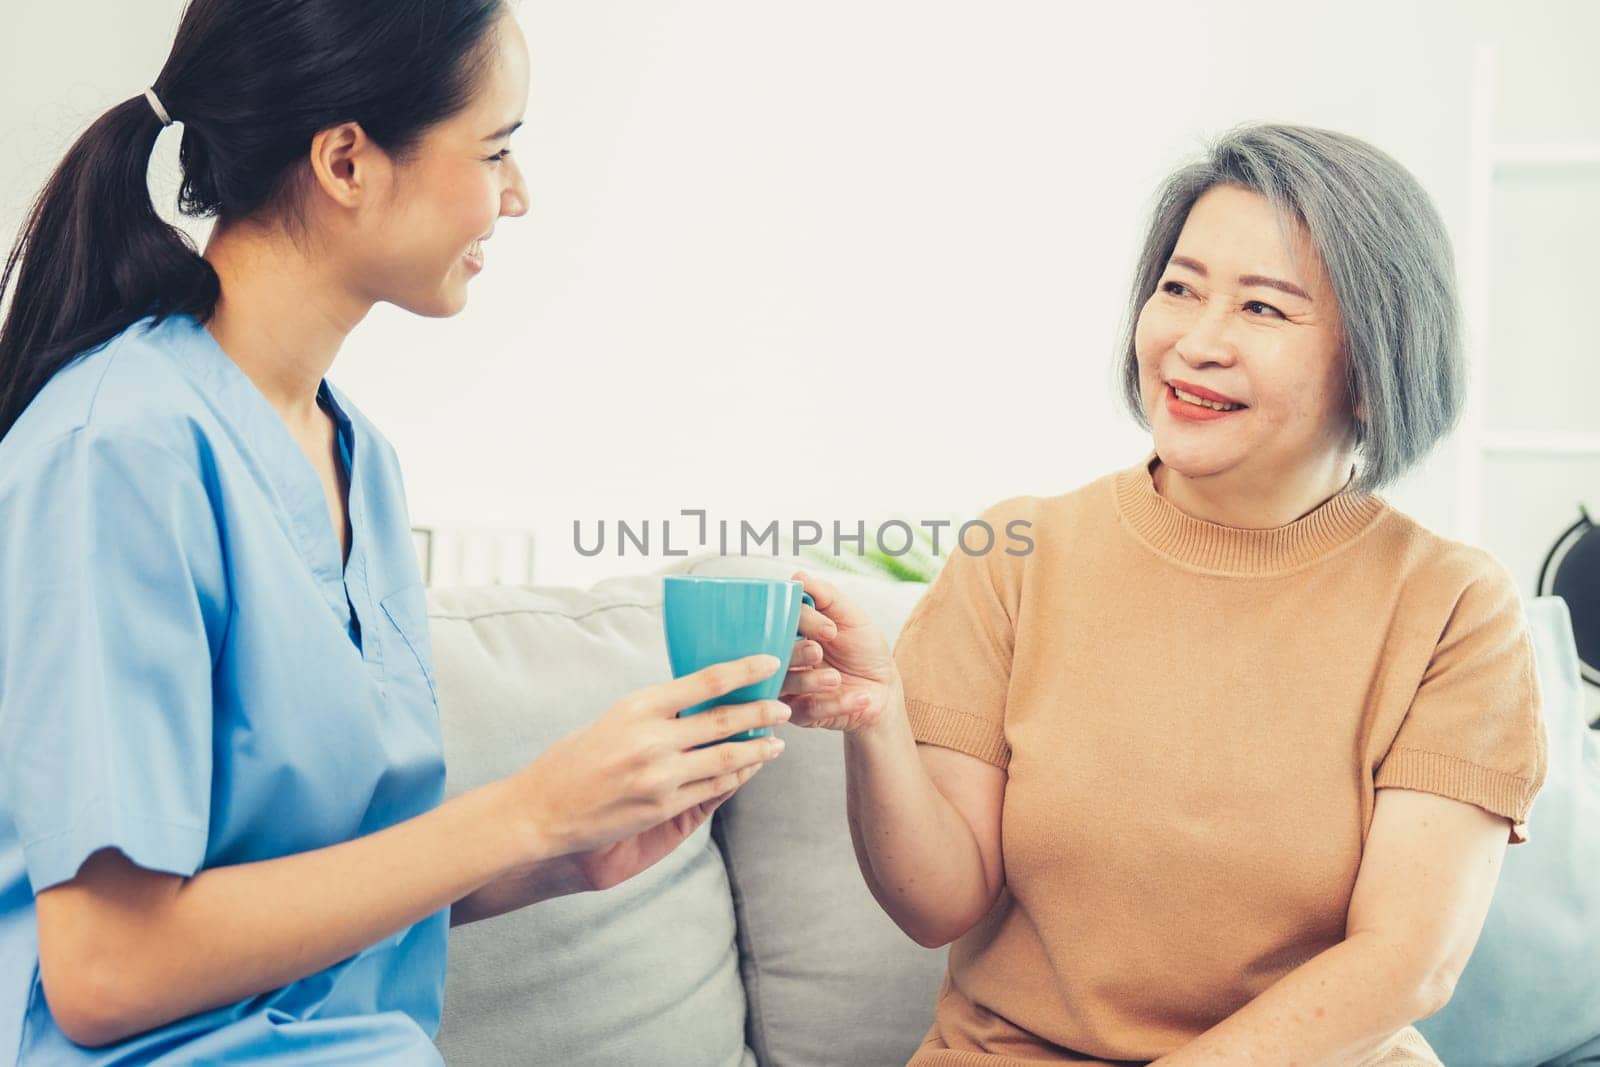 Female care taker serving her contented senior patient with a cup of coffee at home, smiling to each other. Medical care for pensioners, Home health care service.